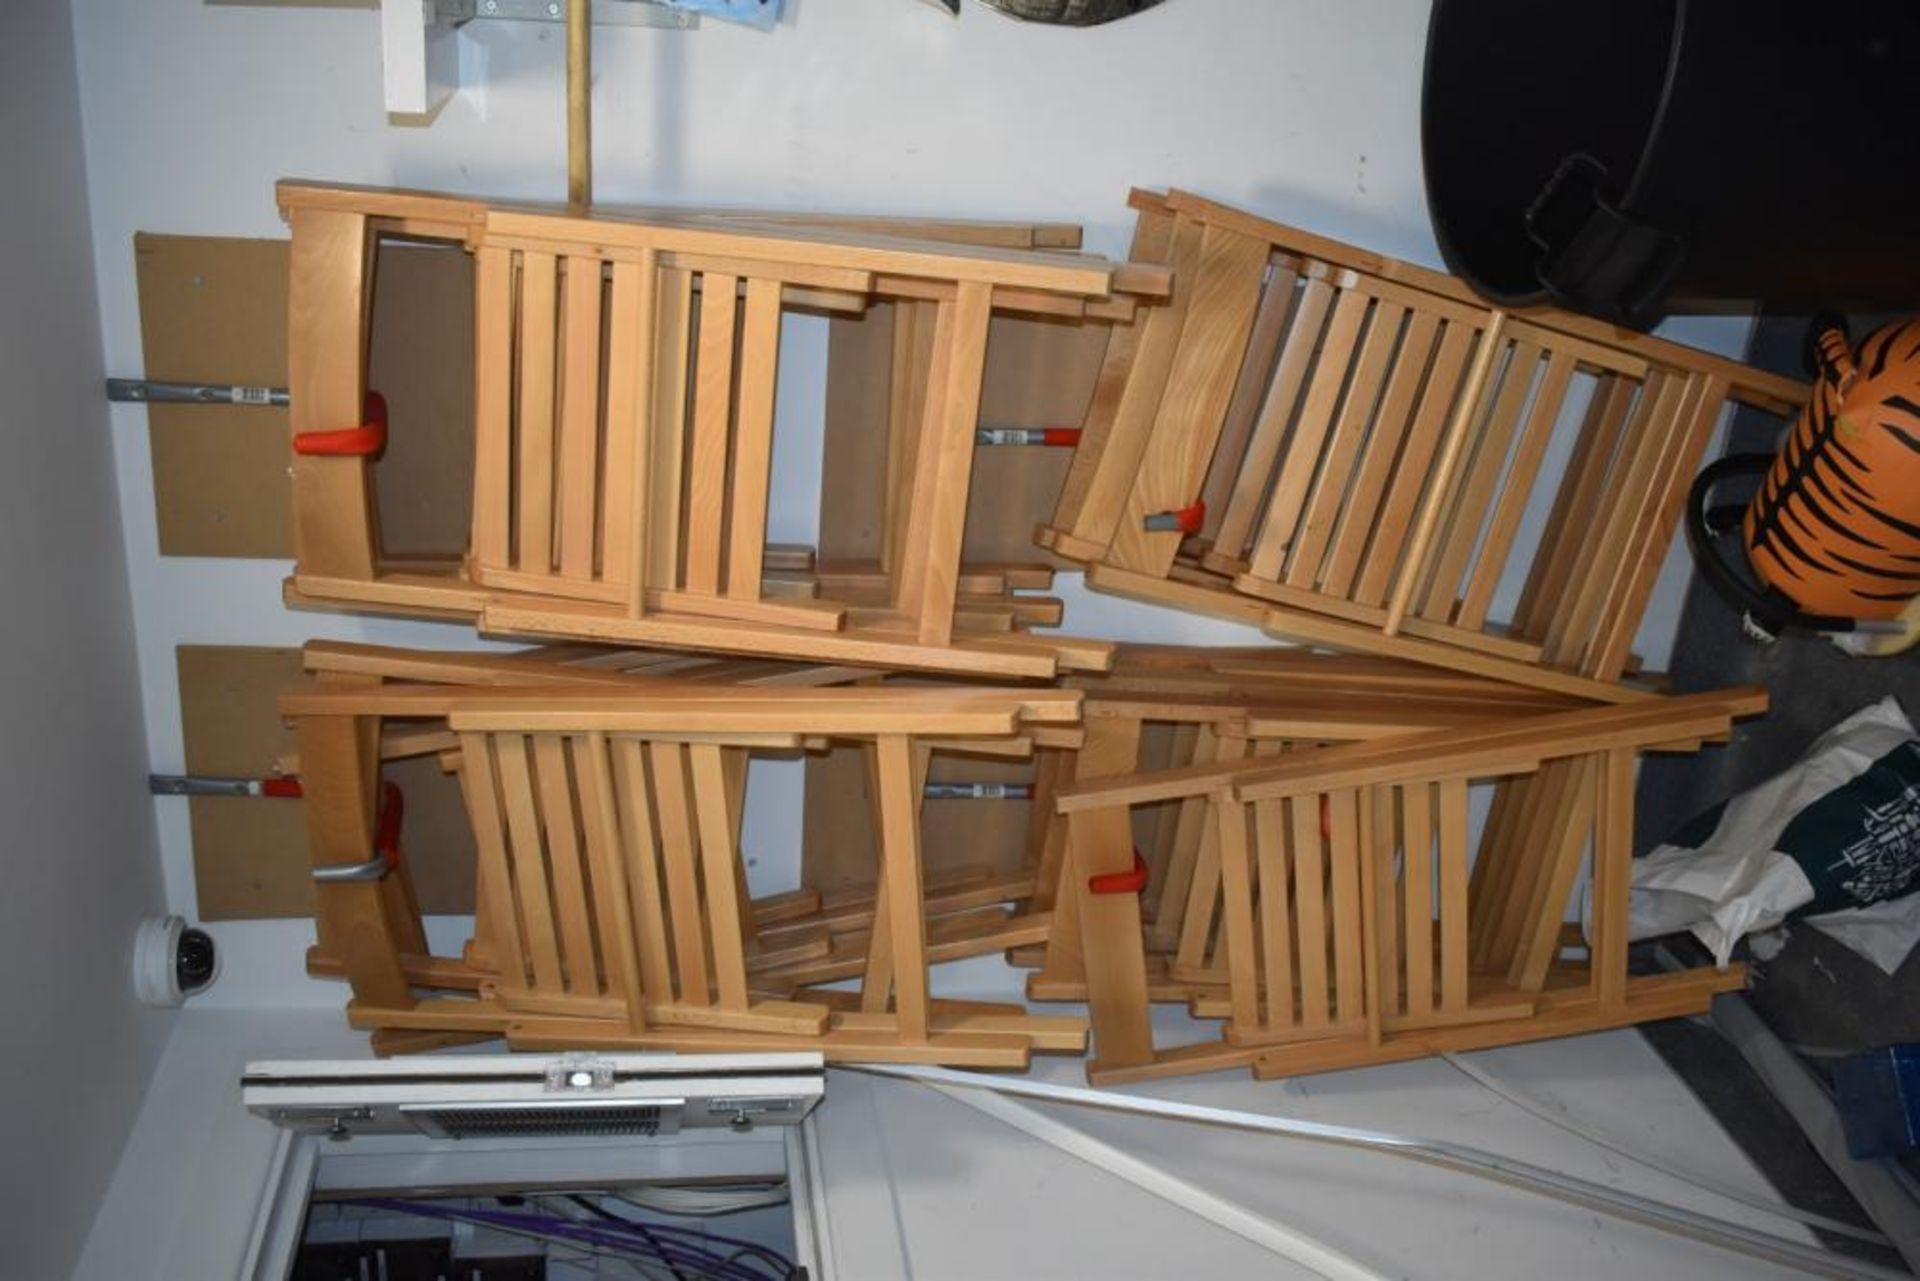 14 x Wooden Folding Chairs - CL489 - Location: Putney, London, SW15 - Image 2 of 2